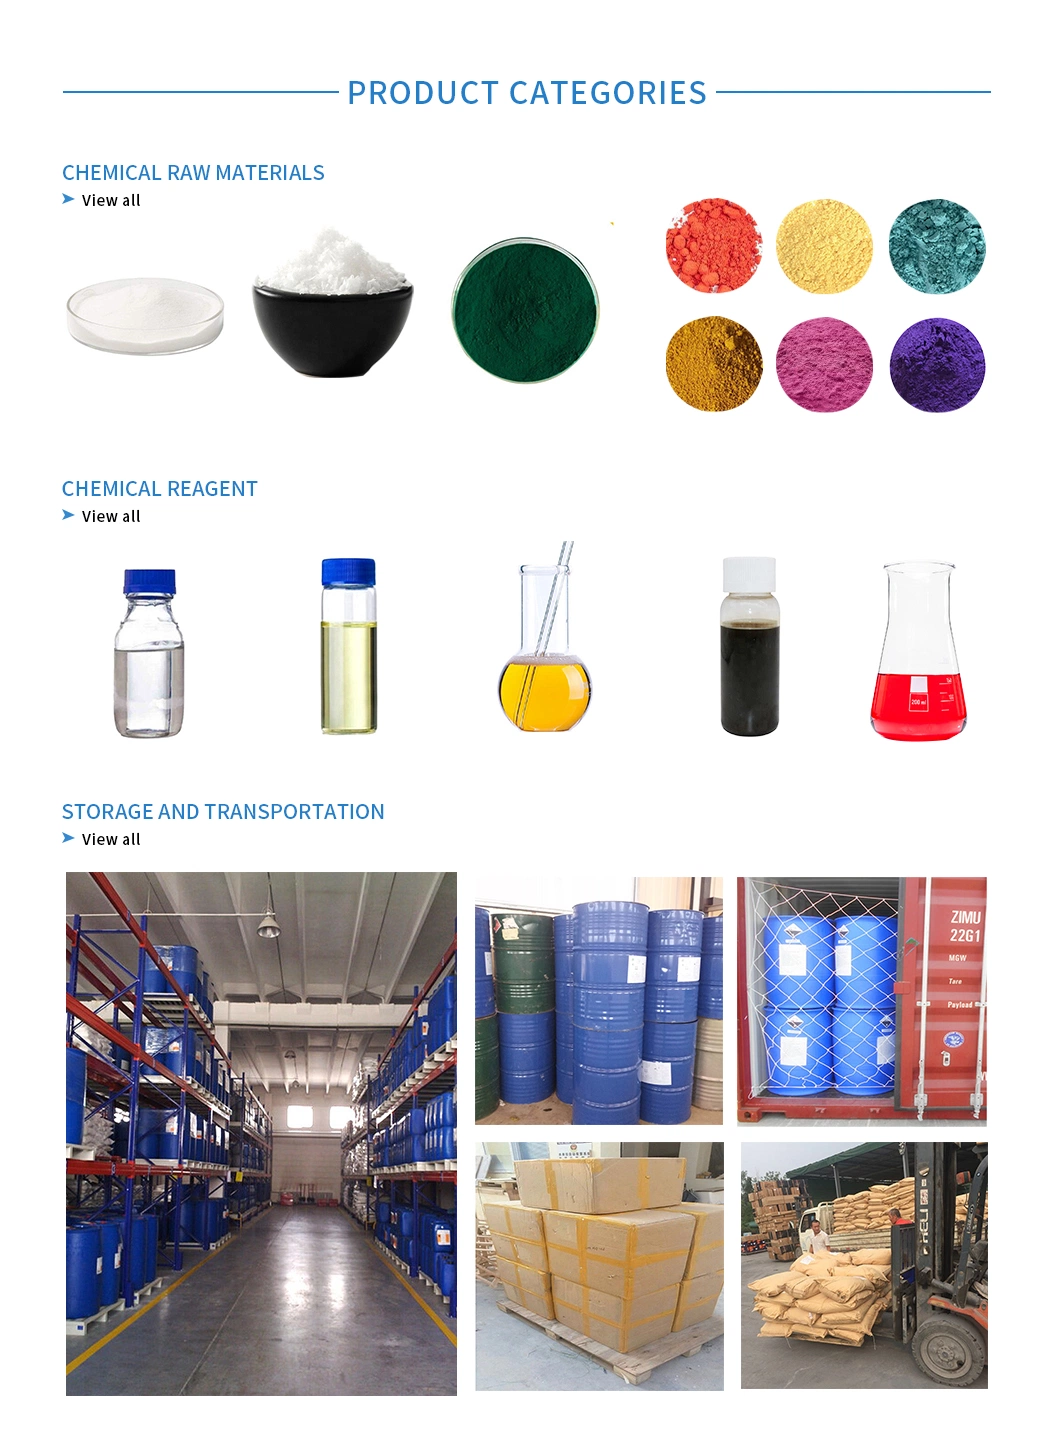 Dyestuff 3 4 9 10-Perylenetetracarboxylic Dianhydride with 98% Purity CAS 128-69-8 Pigment Red 224